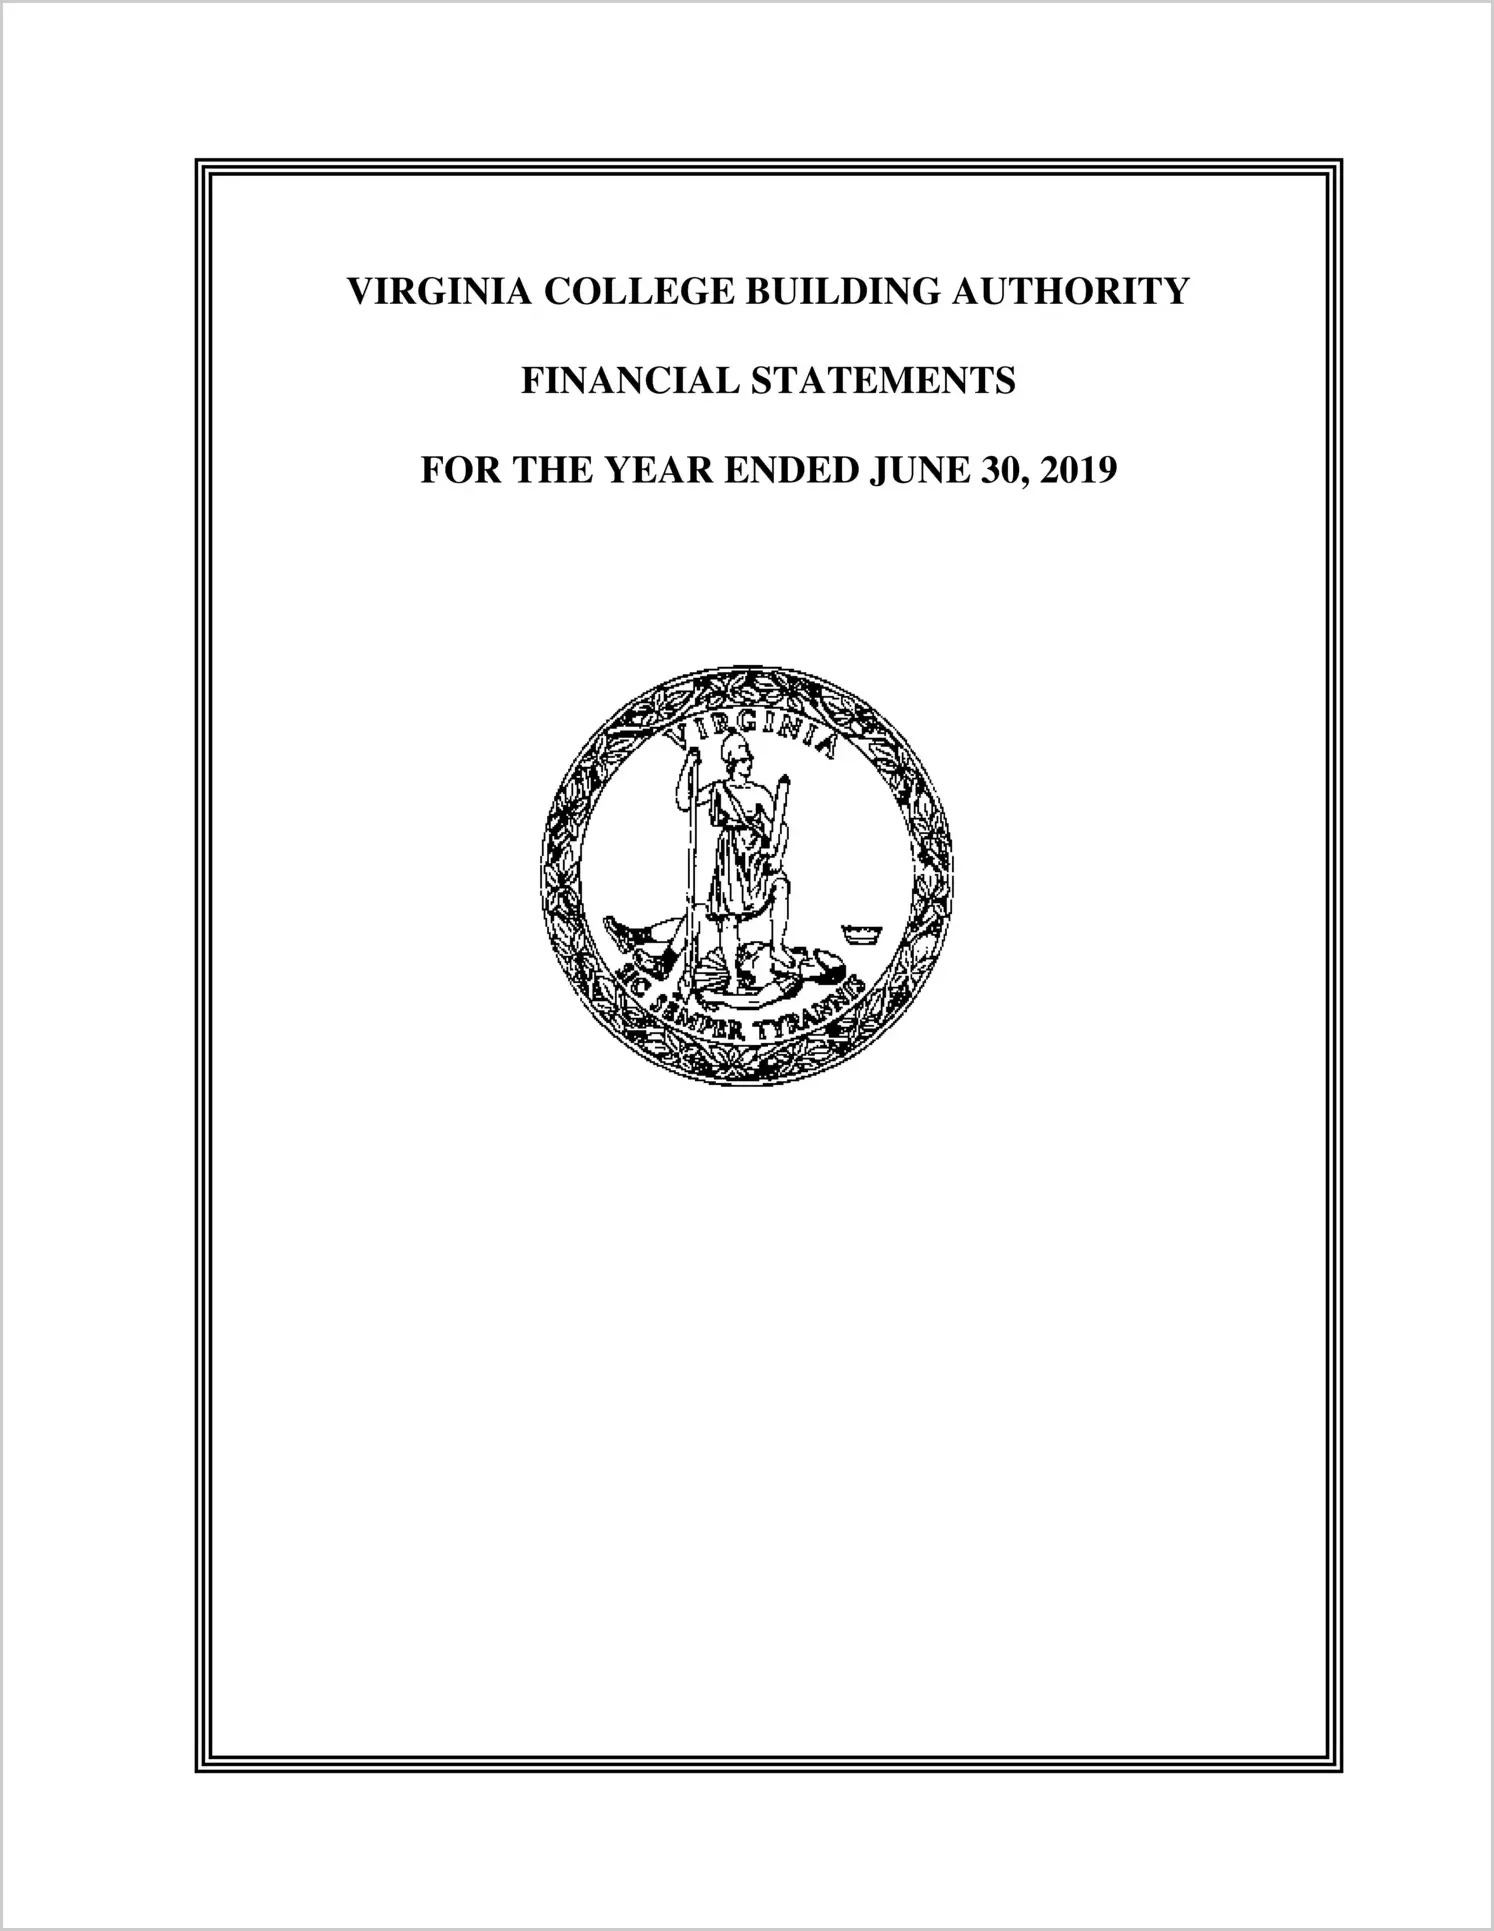 Virginia College Building Authority Financial Statements for the year ended June 30, 2019